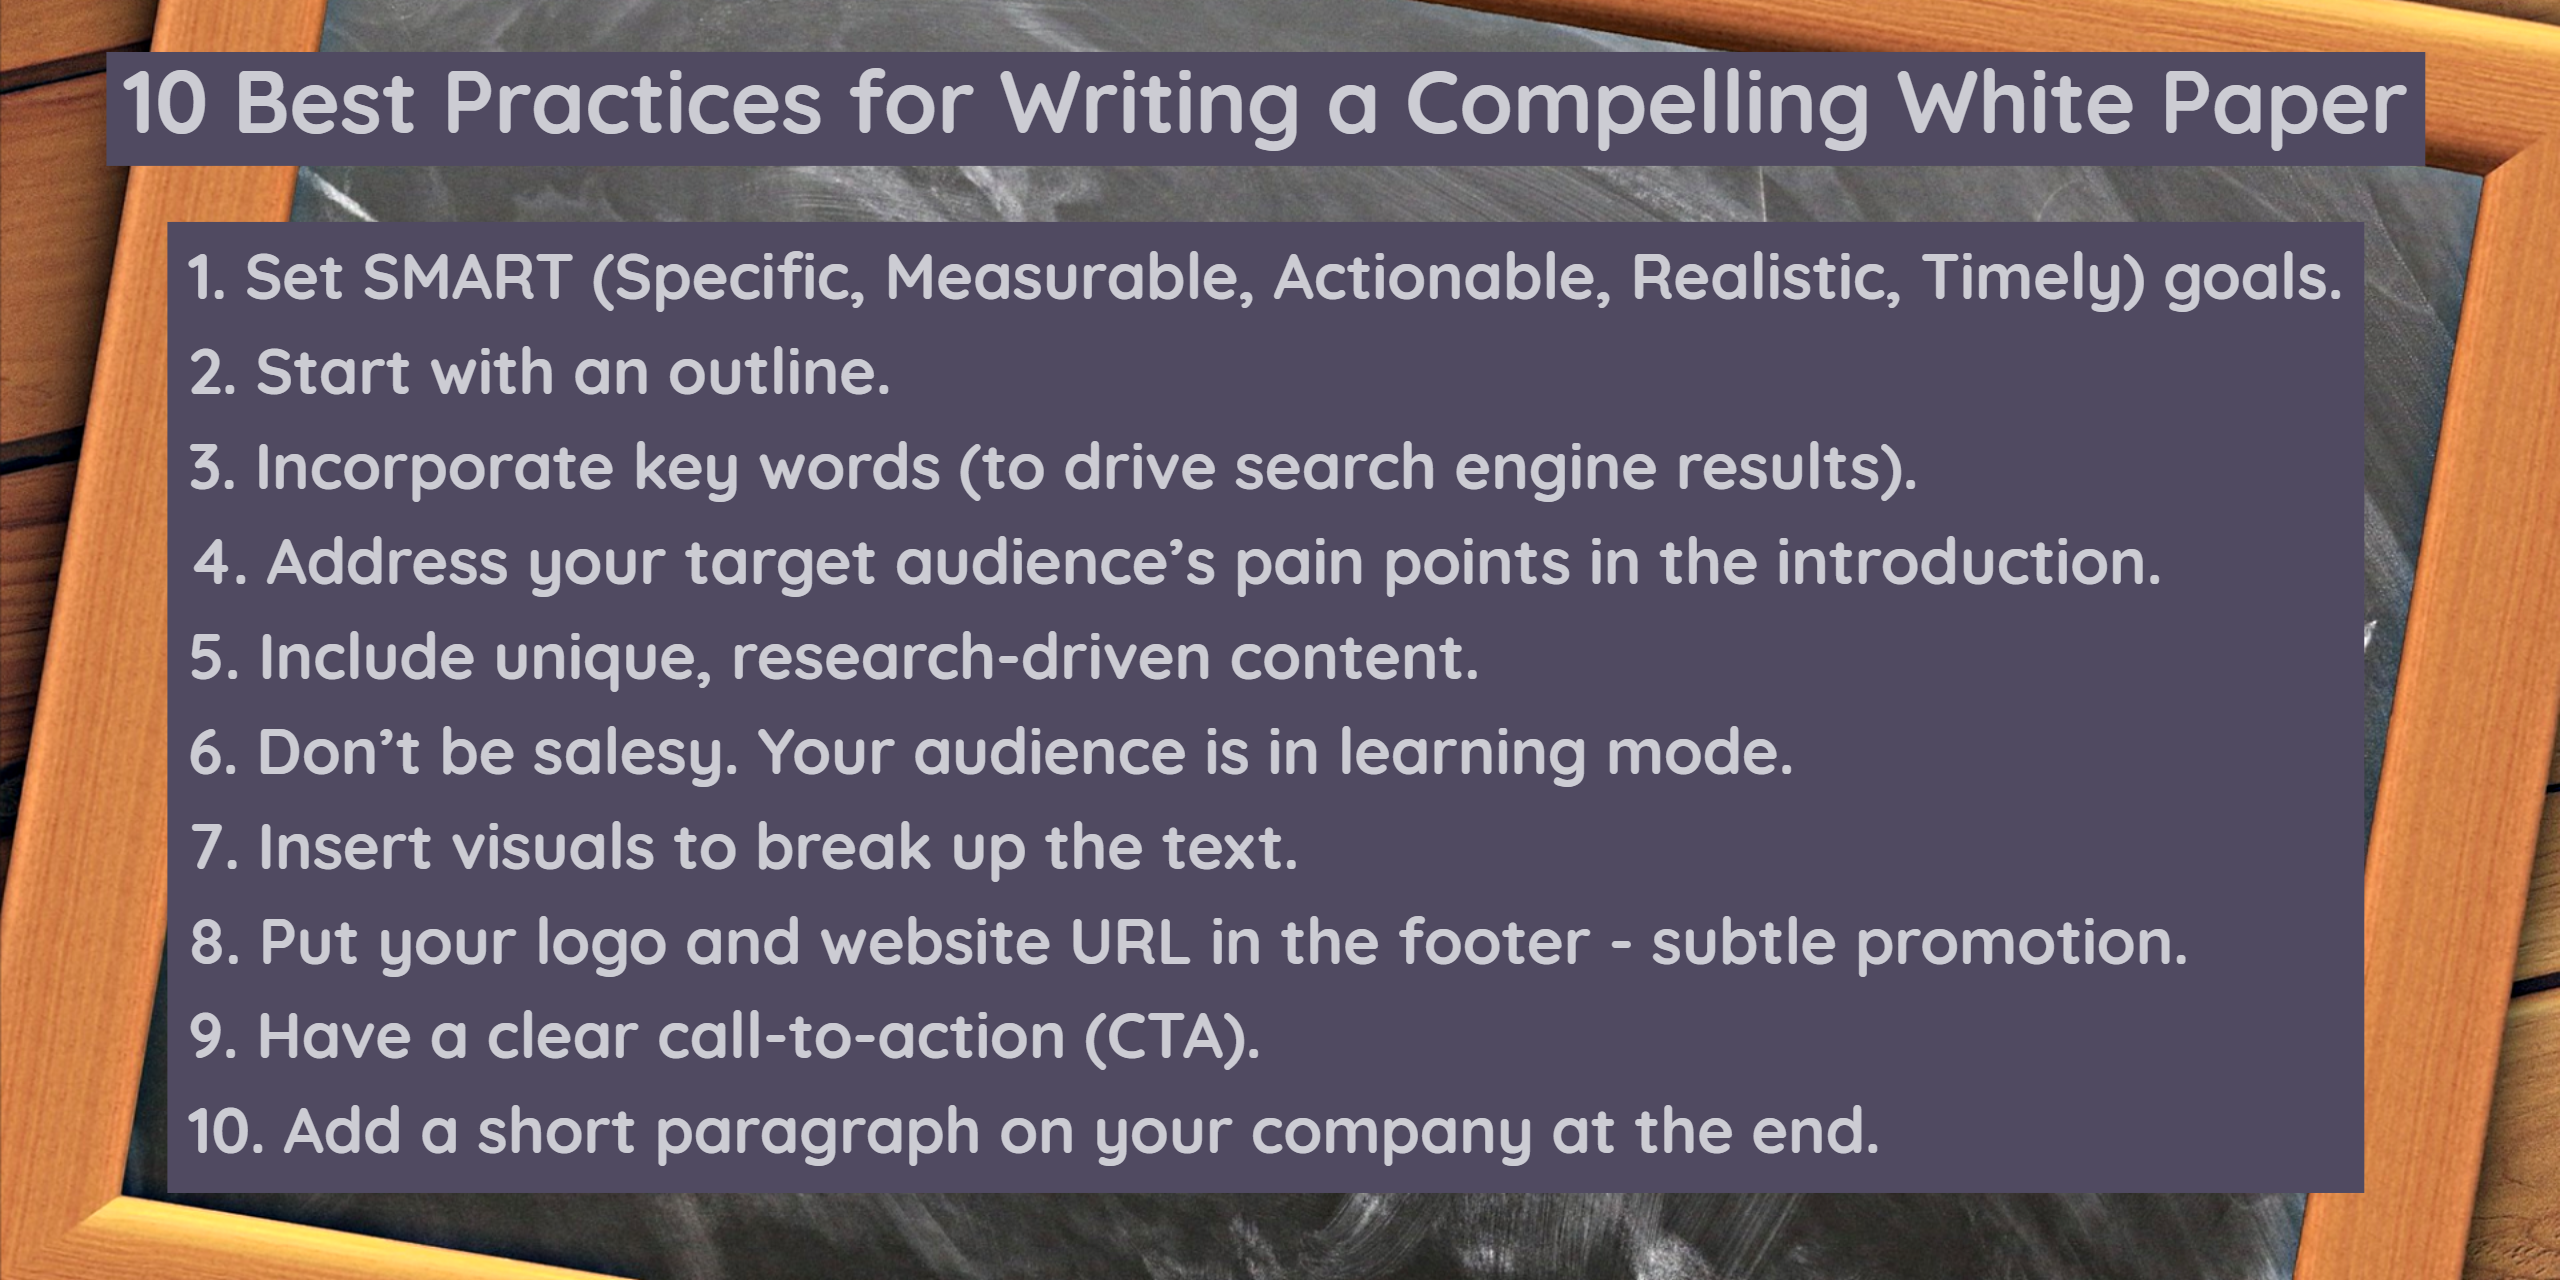 How to Write a Compelling White Paper that People Want to Read